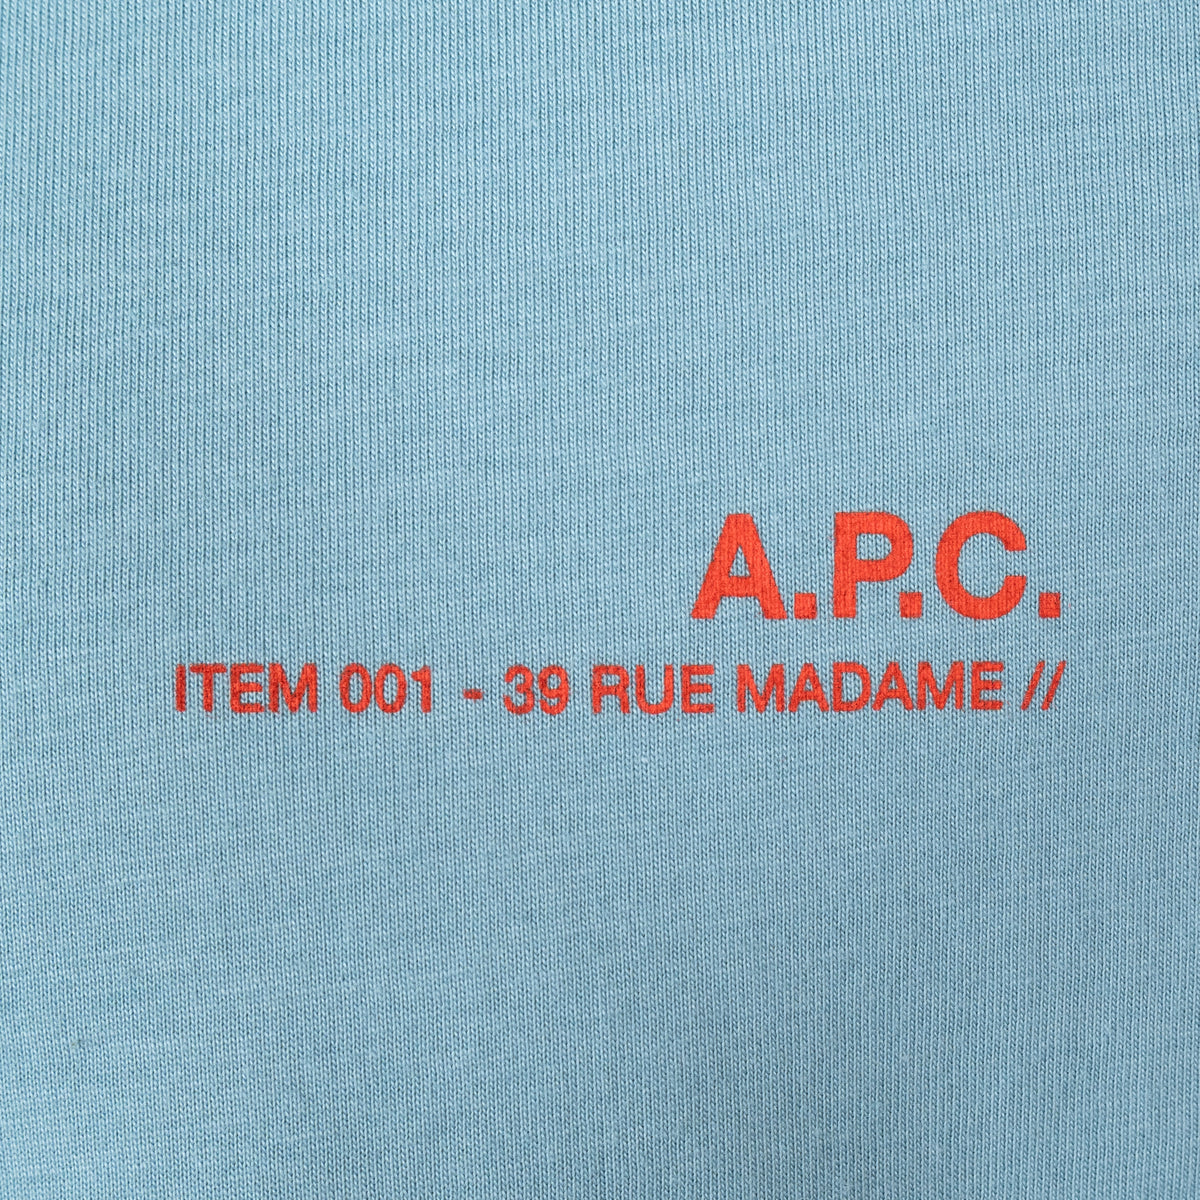 Load image into Gallery viewer, A.P.C. Light Blue Item Logo Tee
